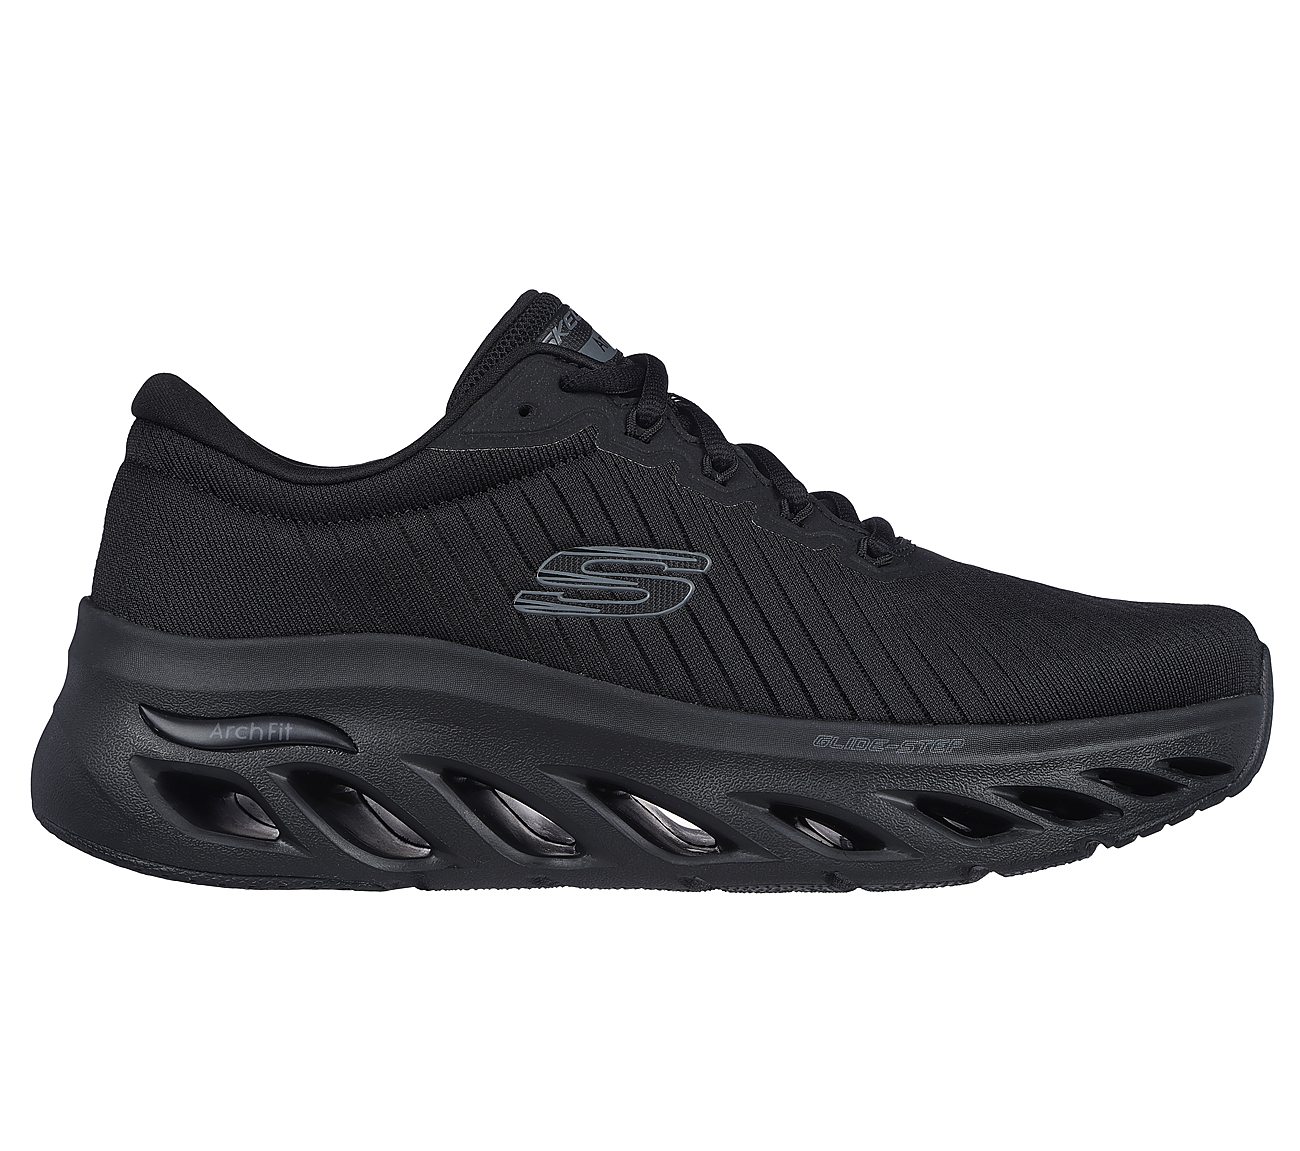 ARCH FIT GLIDE-STEP - KRONOS, BBLACK Footwear Lateral View